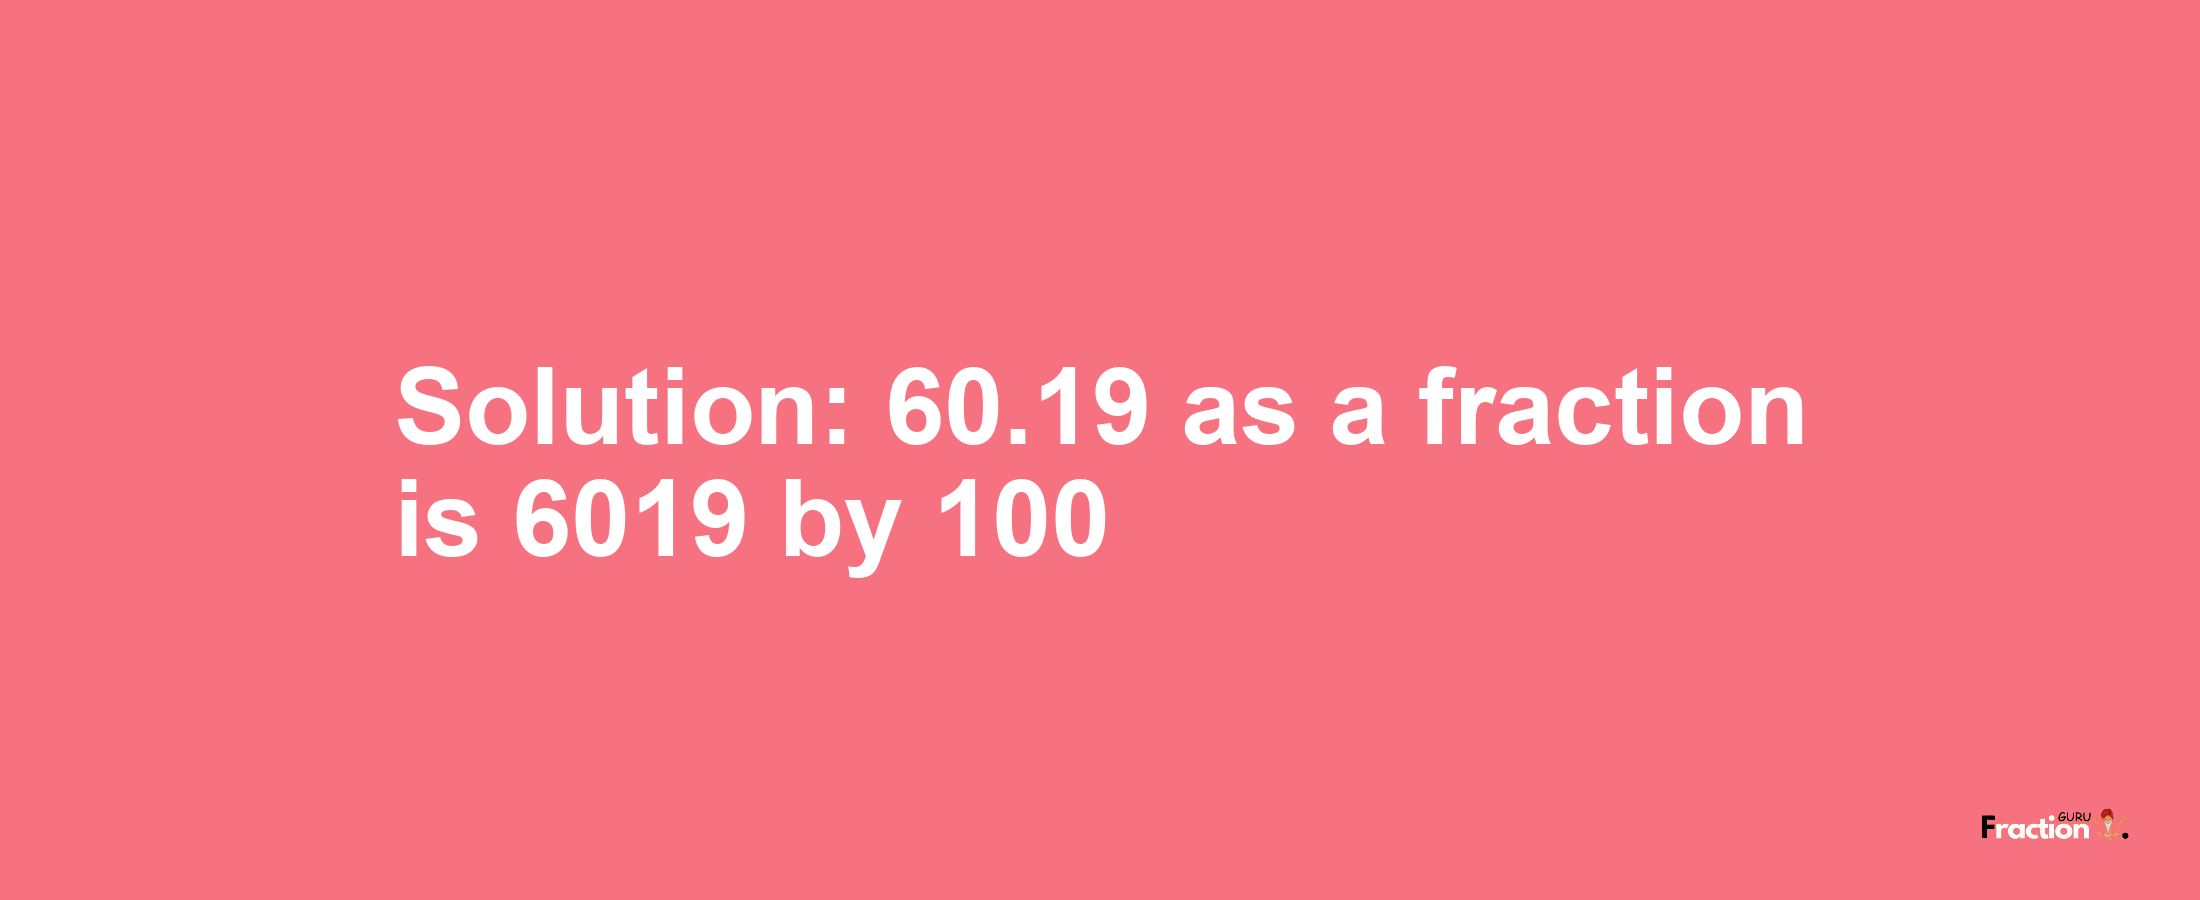 Solution:60.19 as a fraction is 6019/100